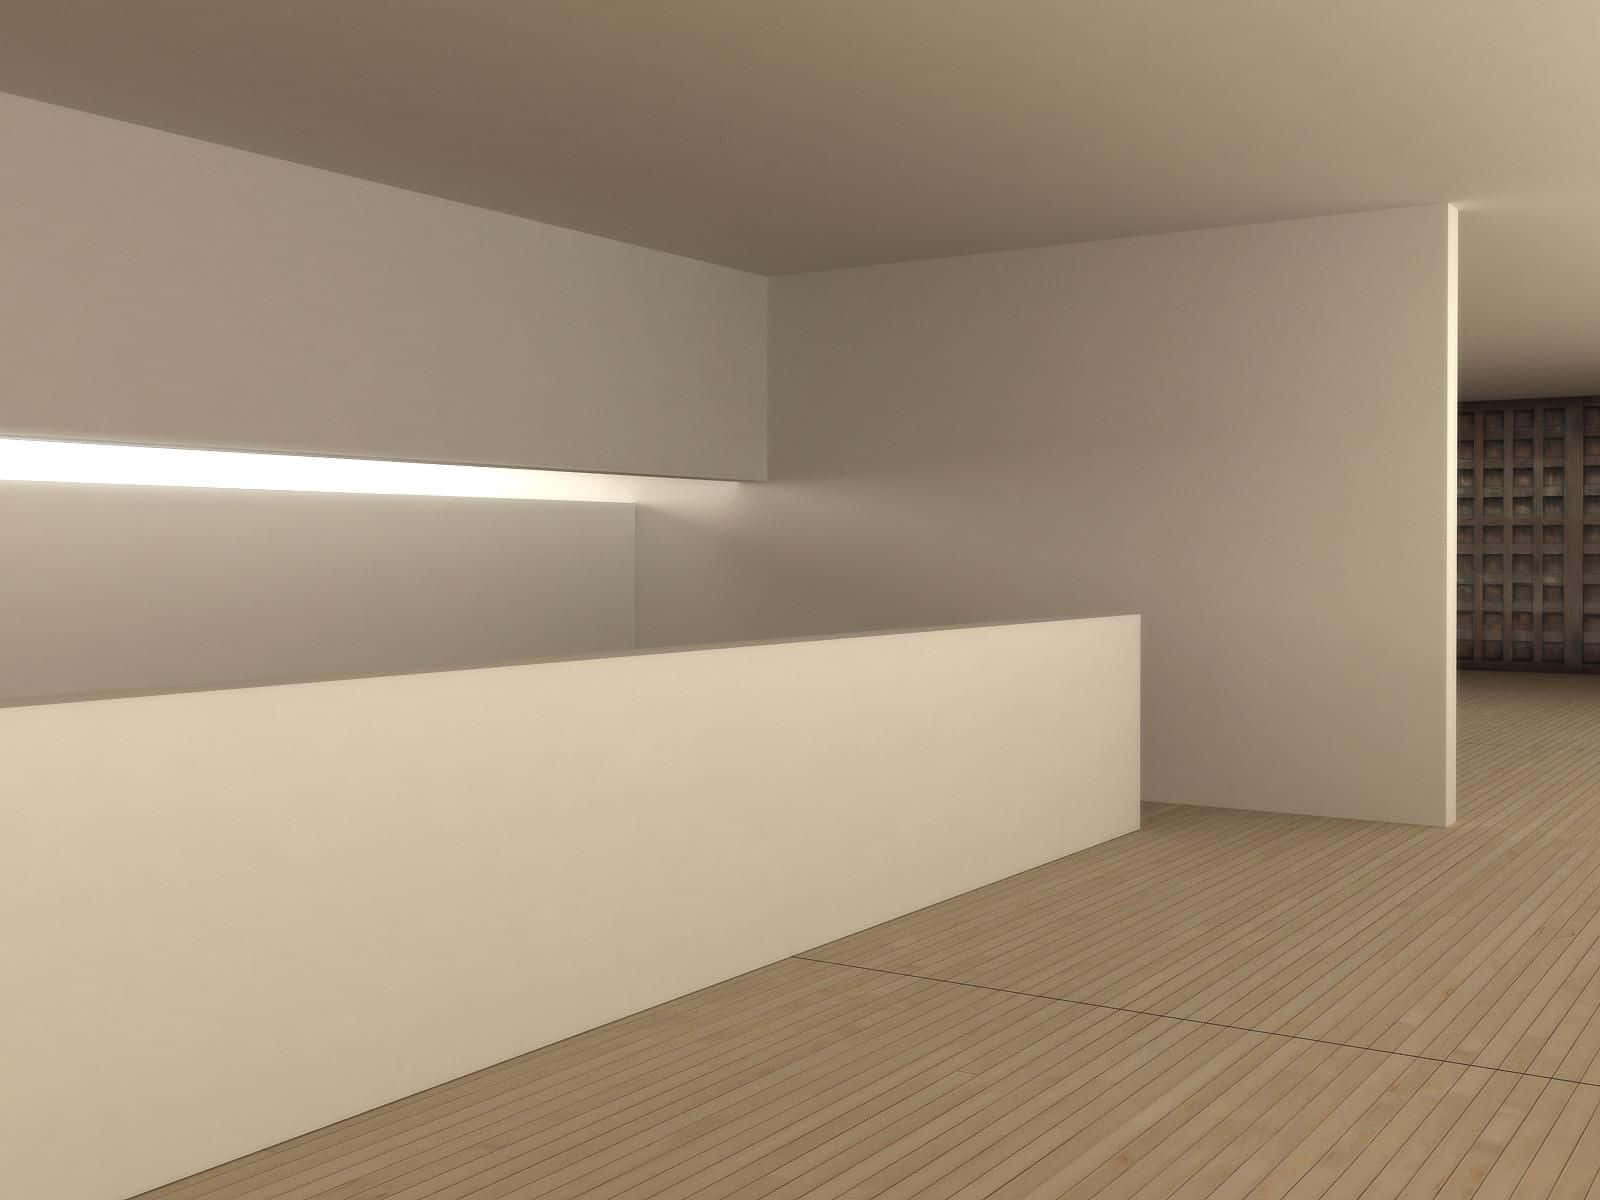 A White Room With A Wooden Floor And A Light